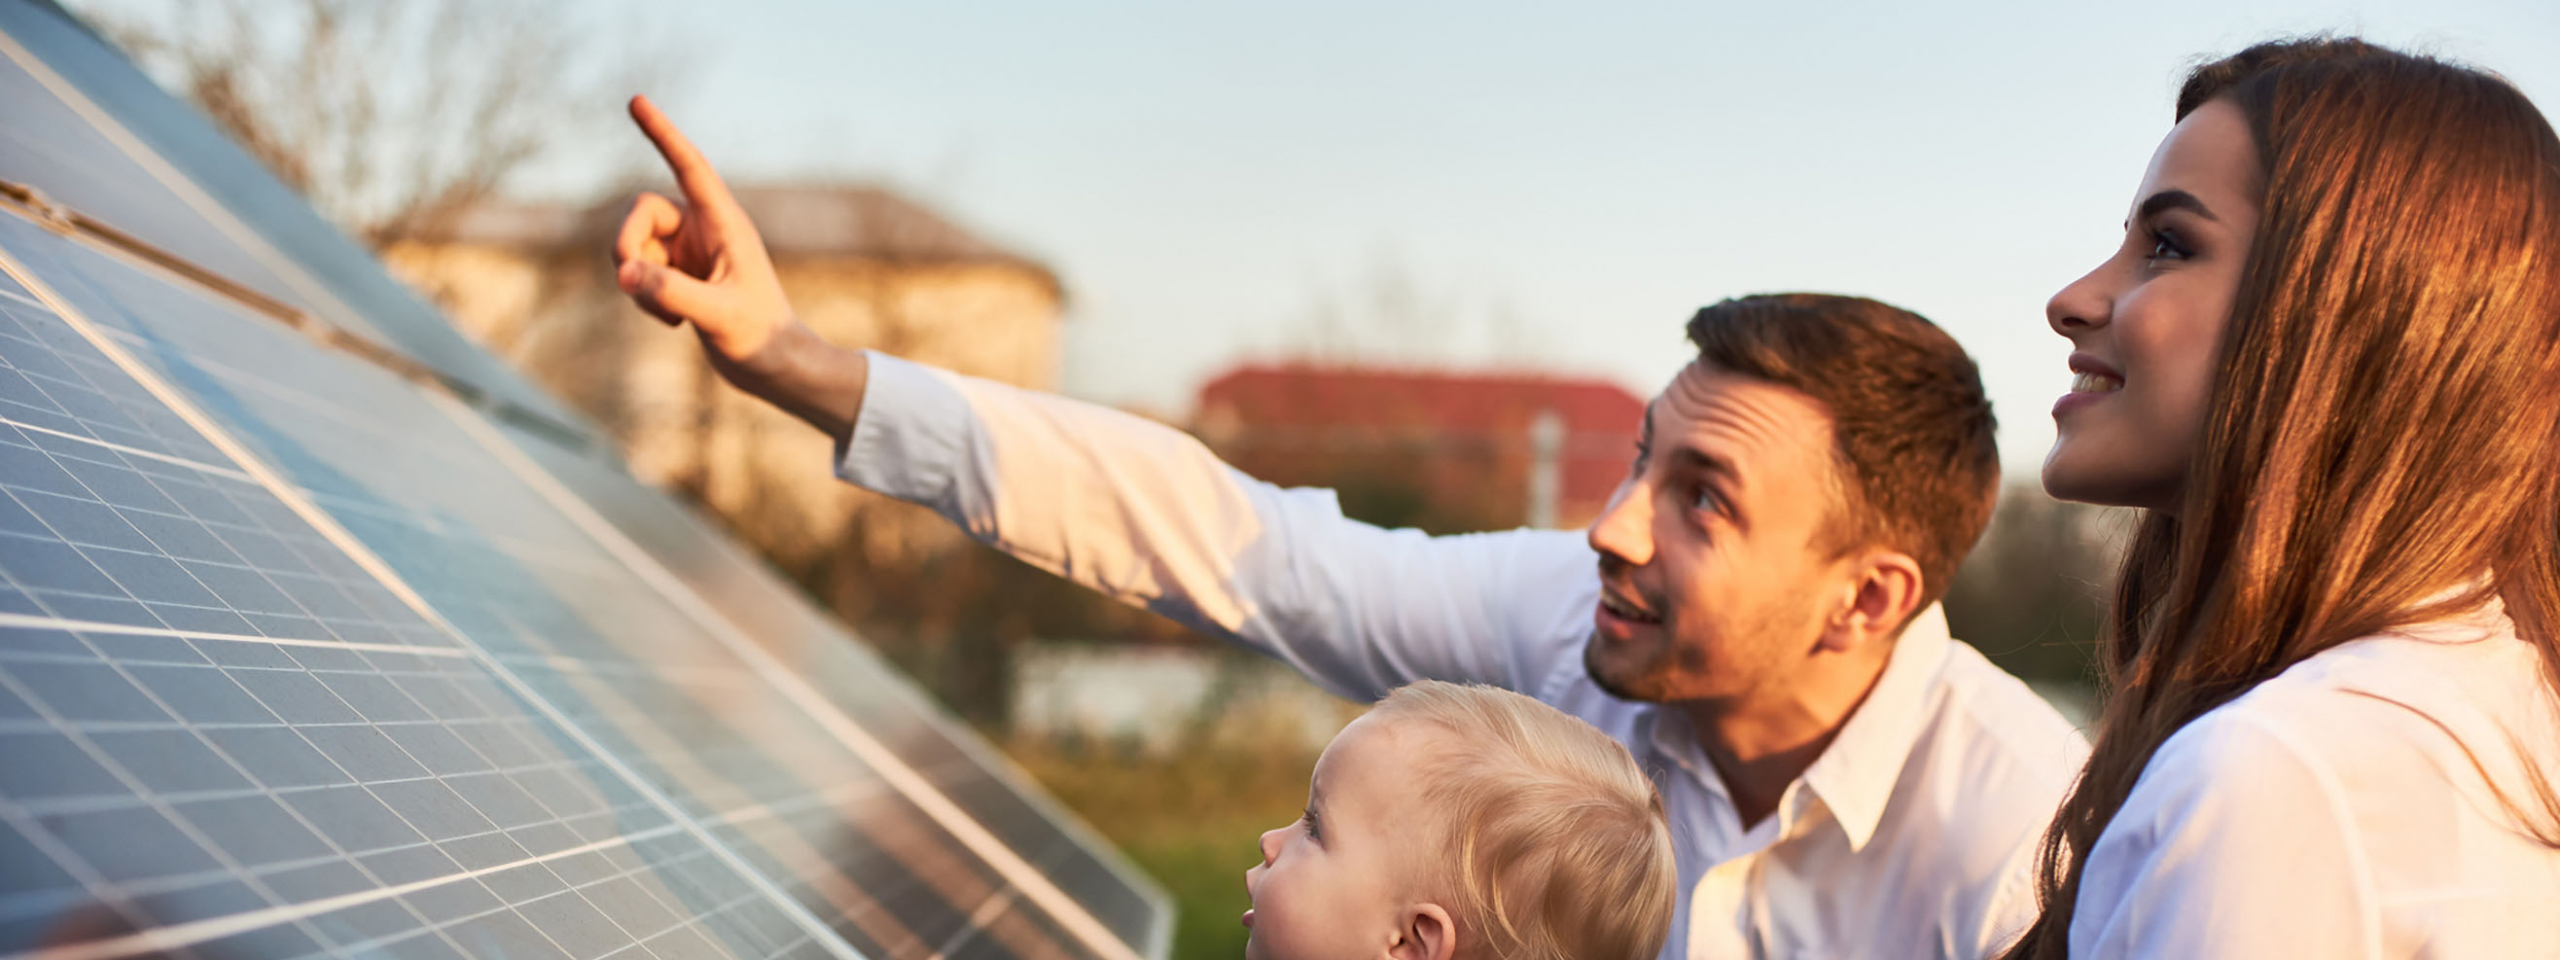 A man, woman, and child looking up at a set of solar panel